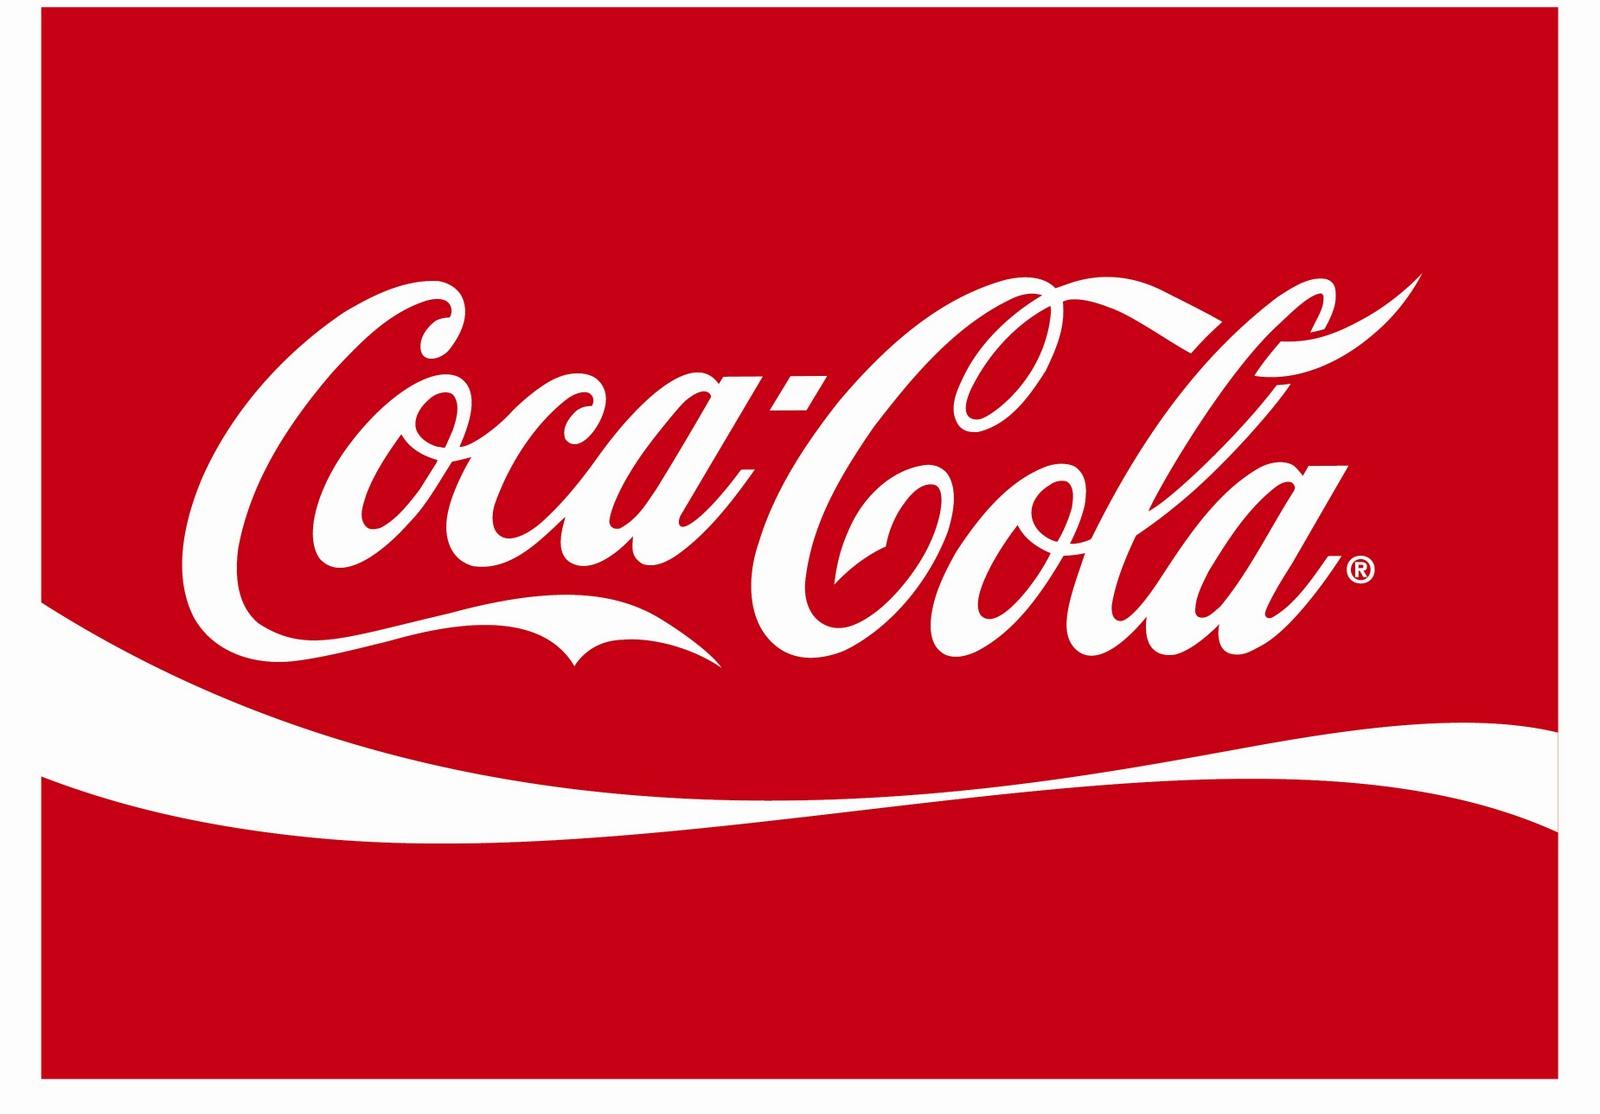 Signing 3 year contract with Hindusthan Coca-Cola for approx Rs.750 crores to supply Mango Pulp.